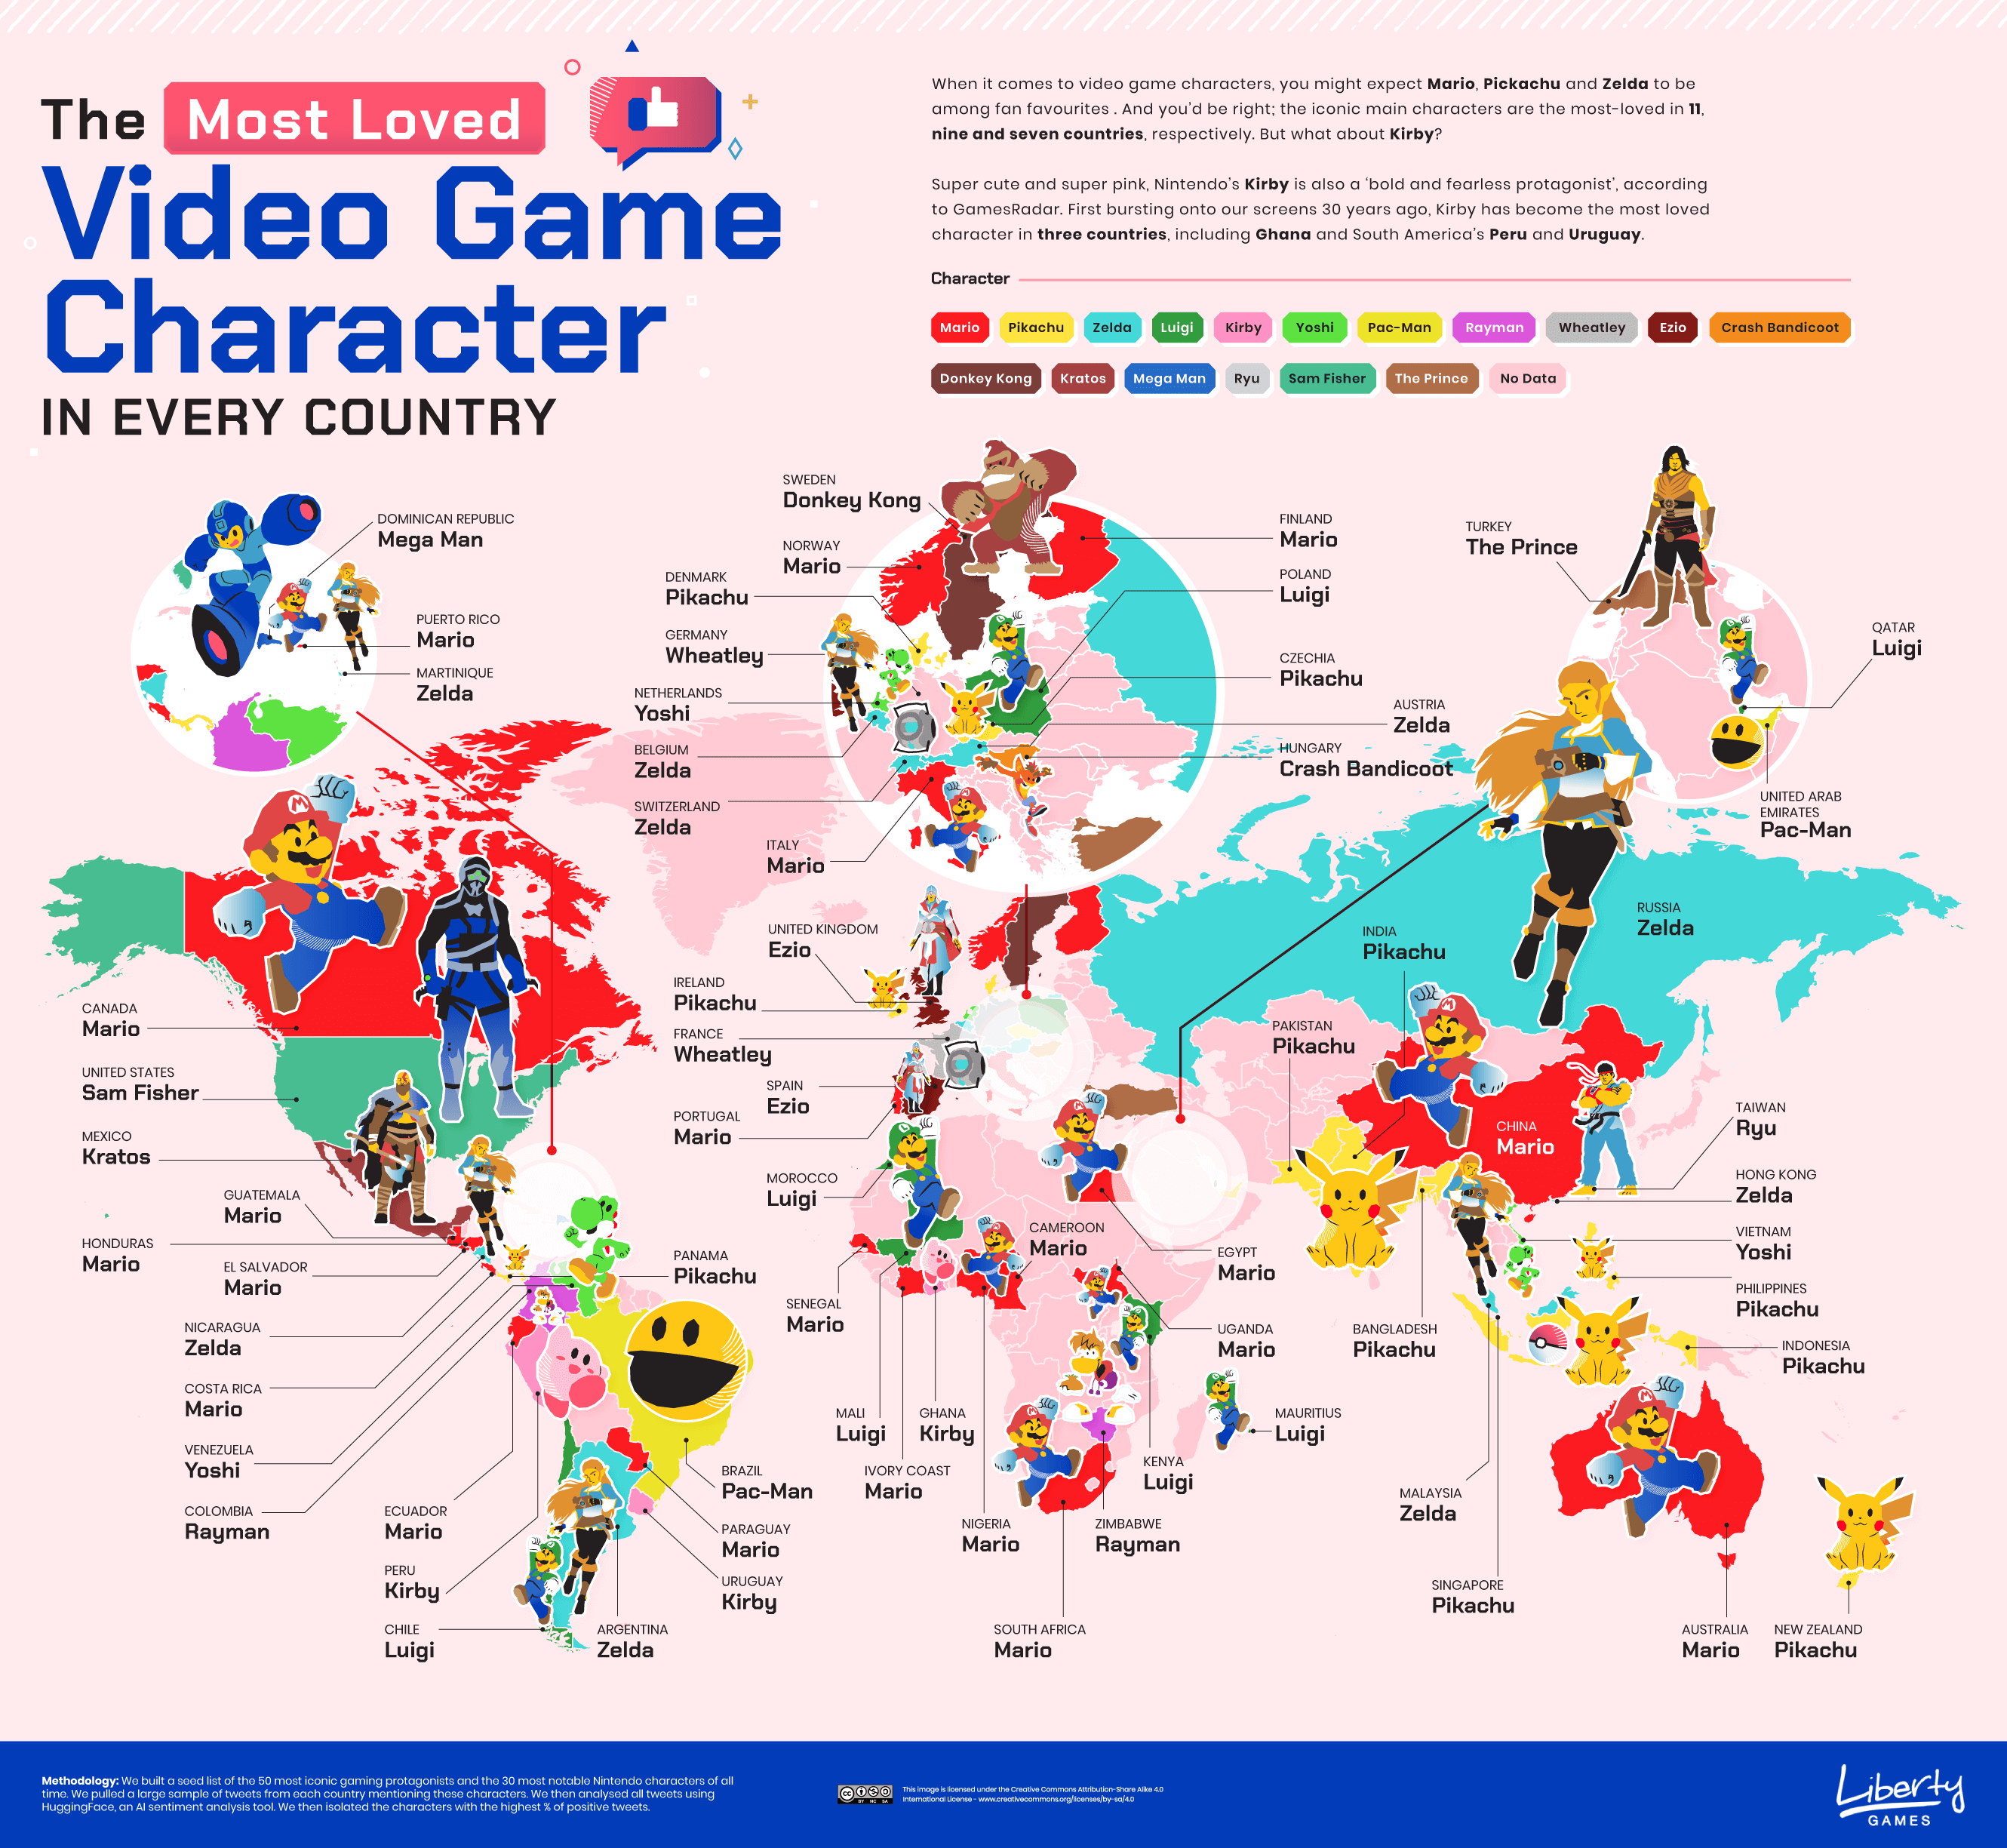 The most loved video game character world map